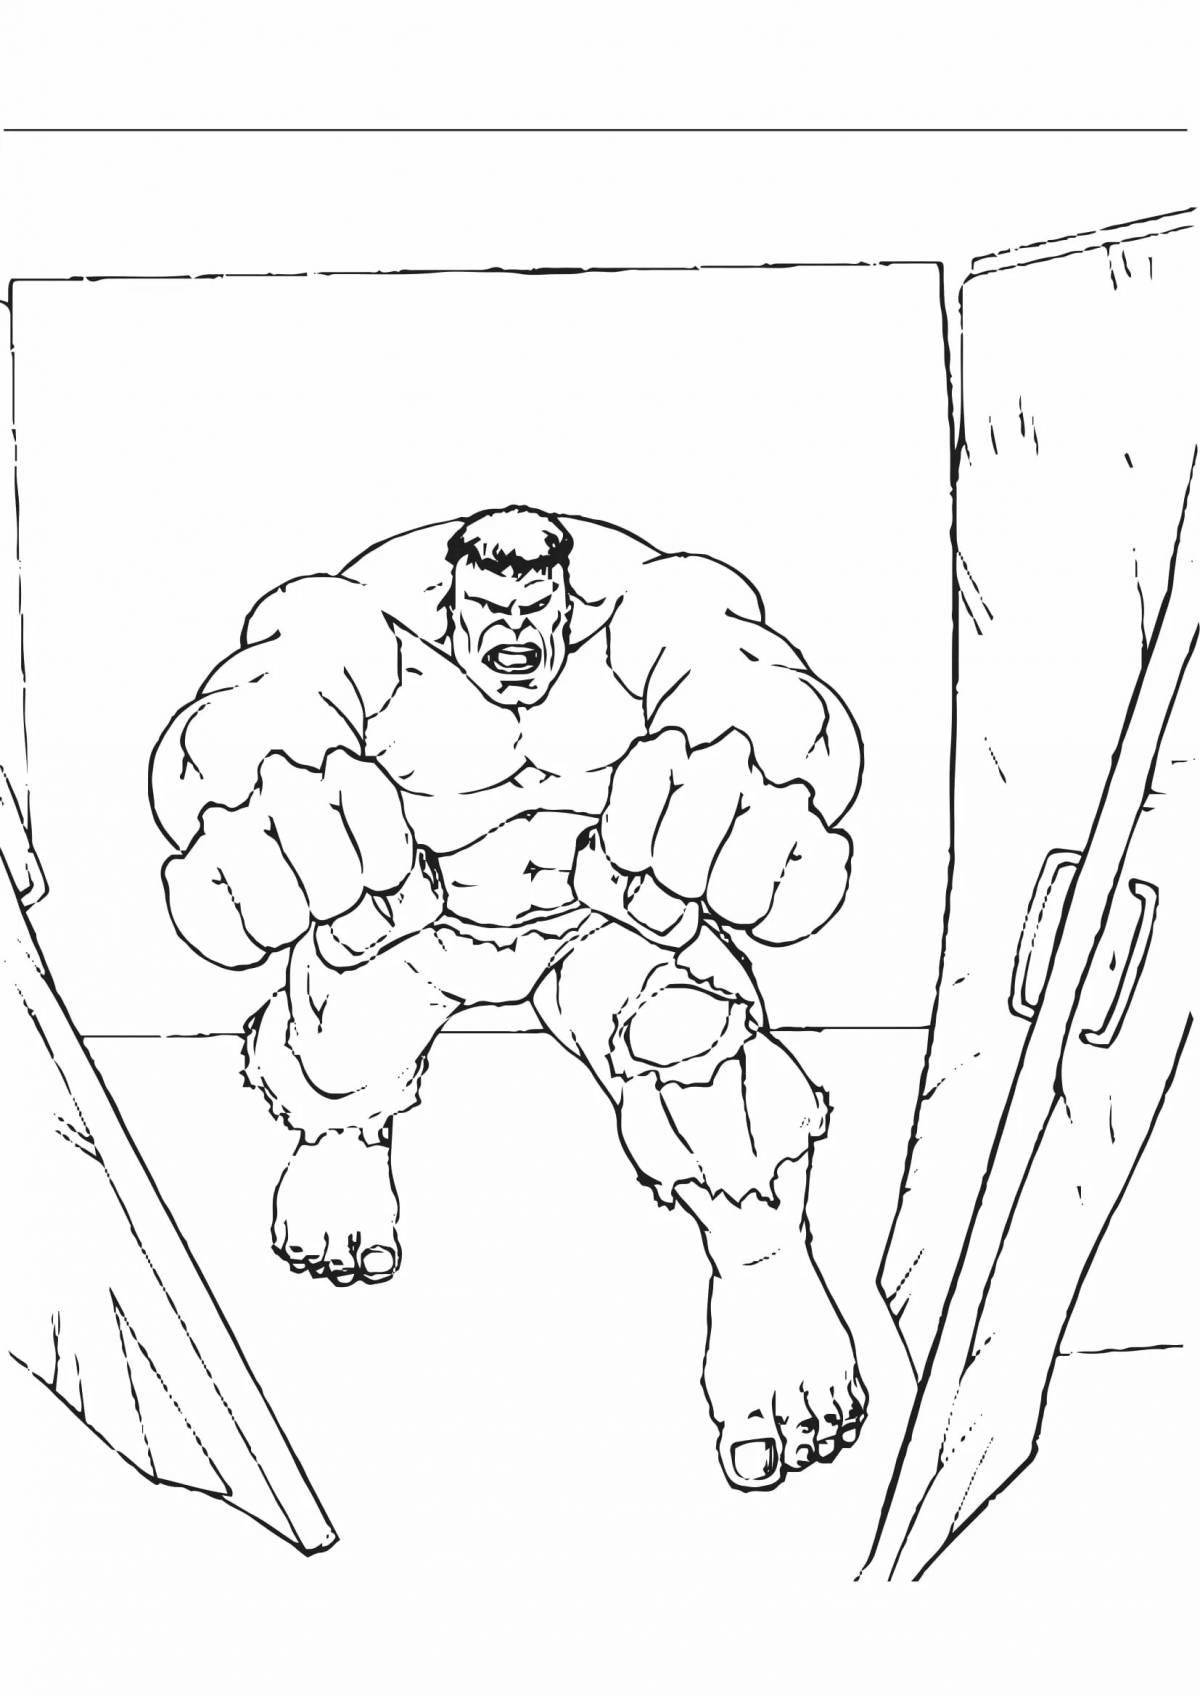 Awesome iron hulk coloring page